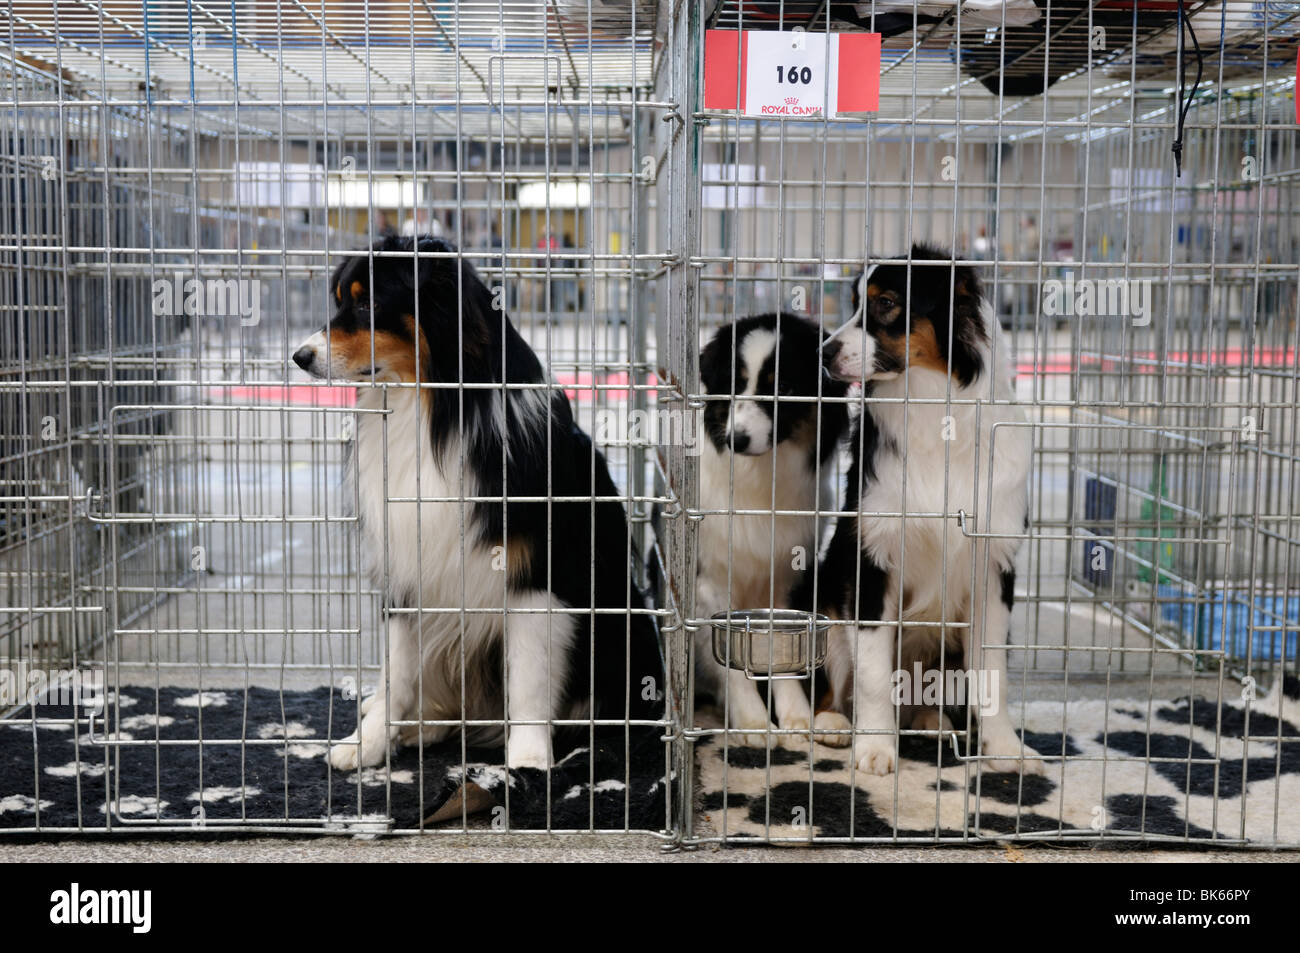 Stock photo of dogs in their cage at a dog show. Stock Photo